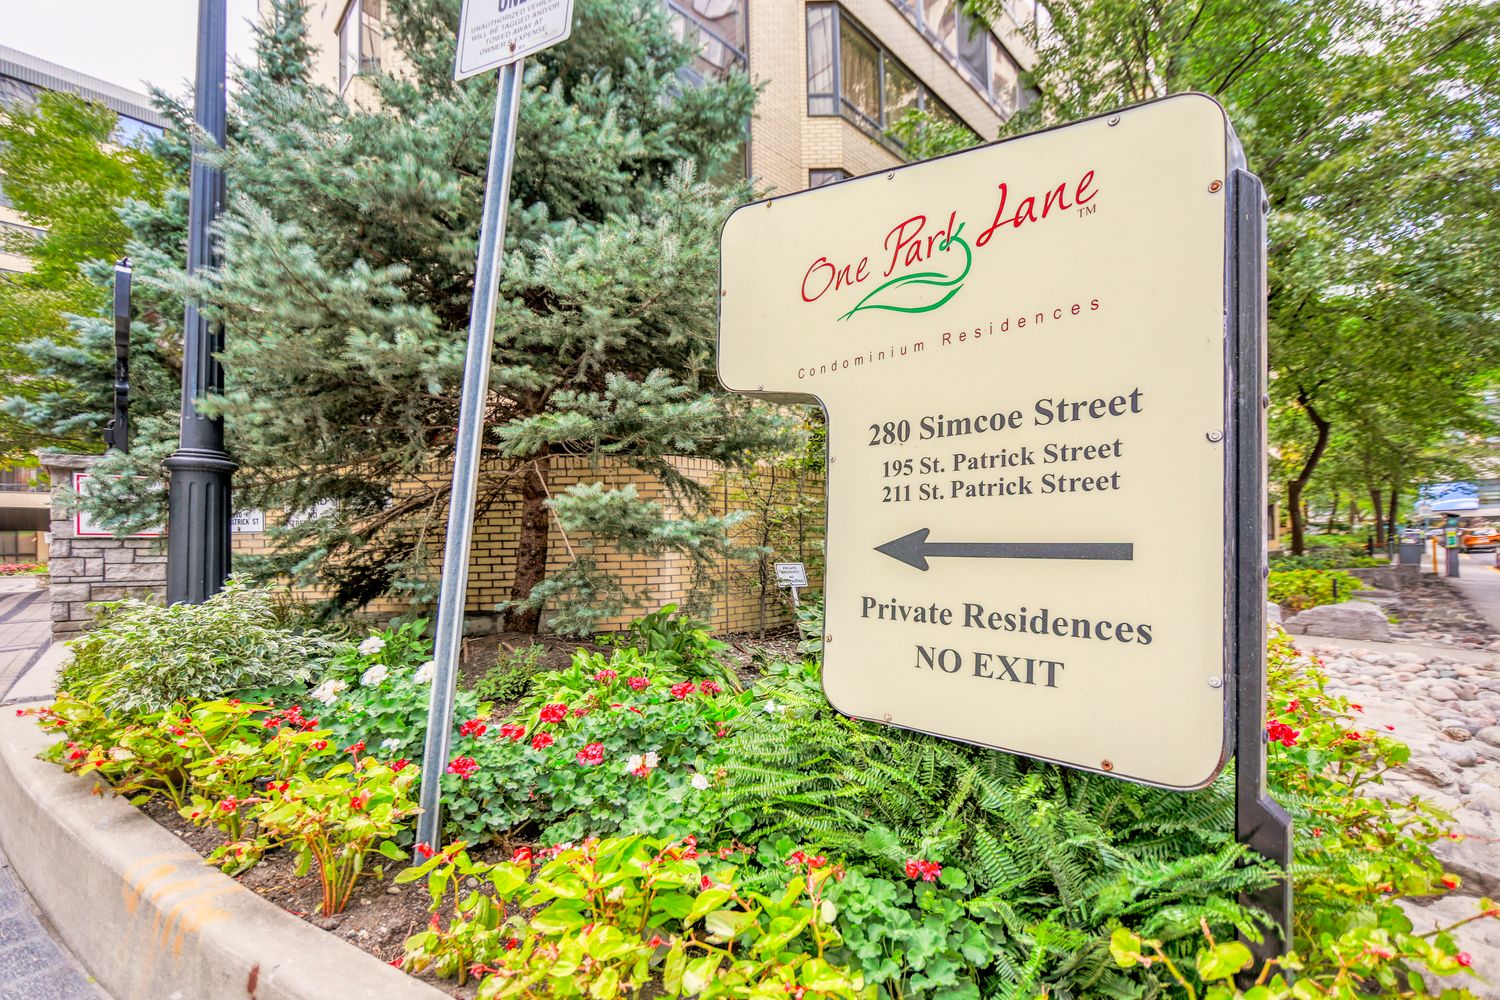 211 St Patrick Street. One Park Lane III Condos is located in  Downtown, Toronto - image #4 of 4